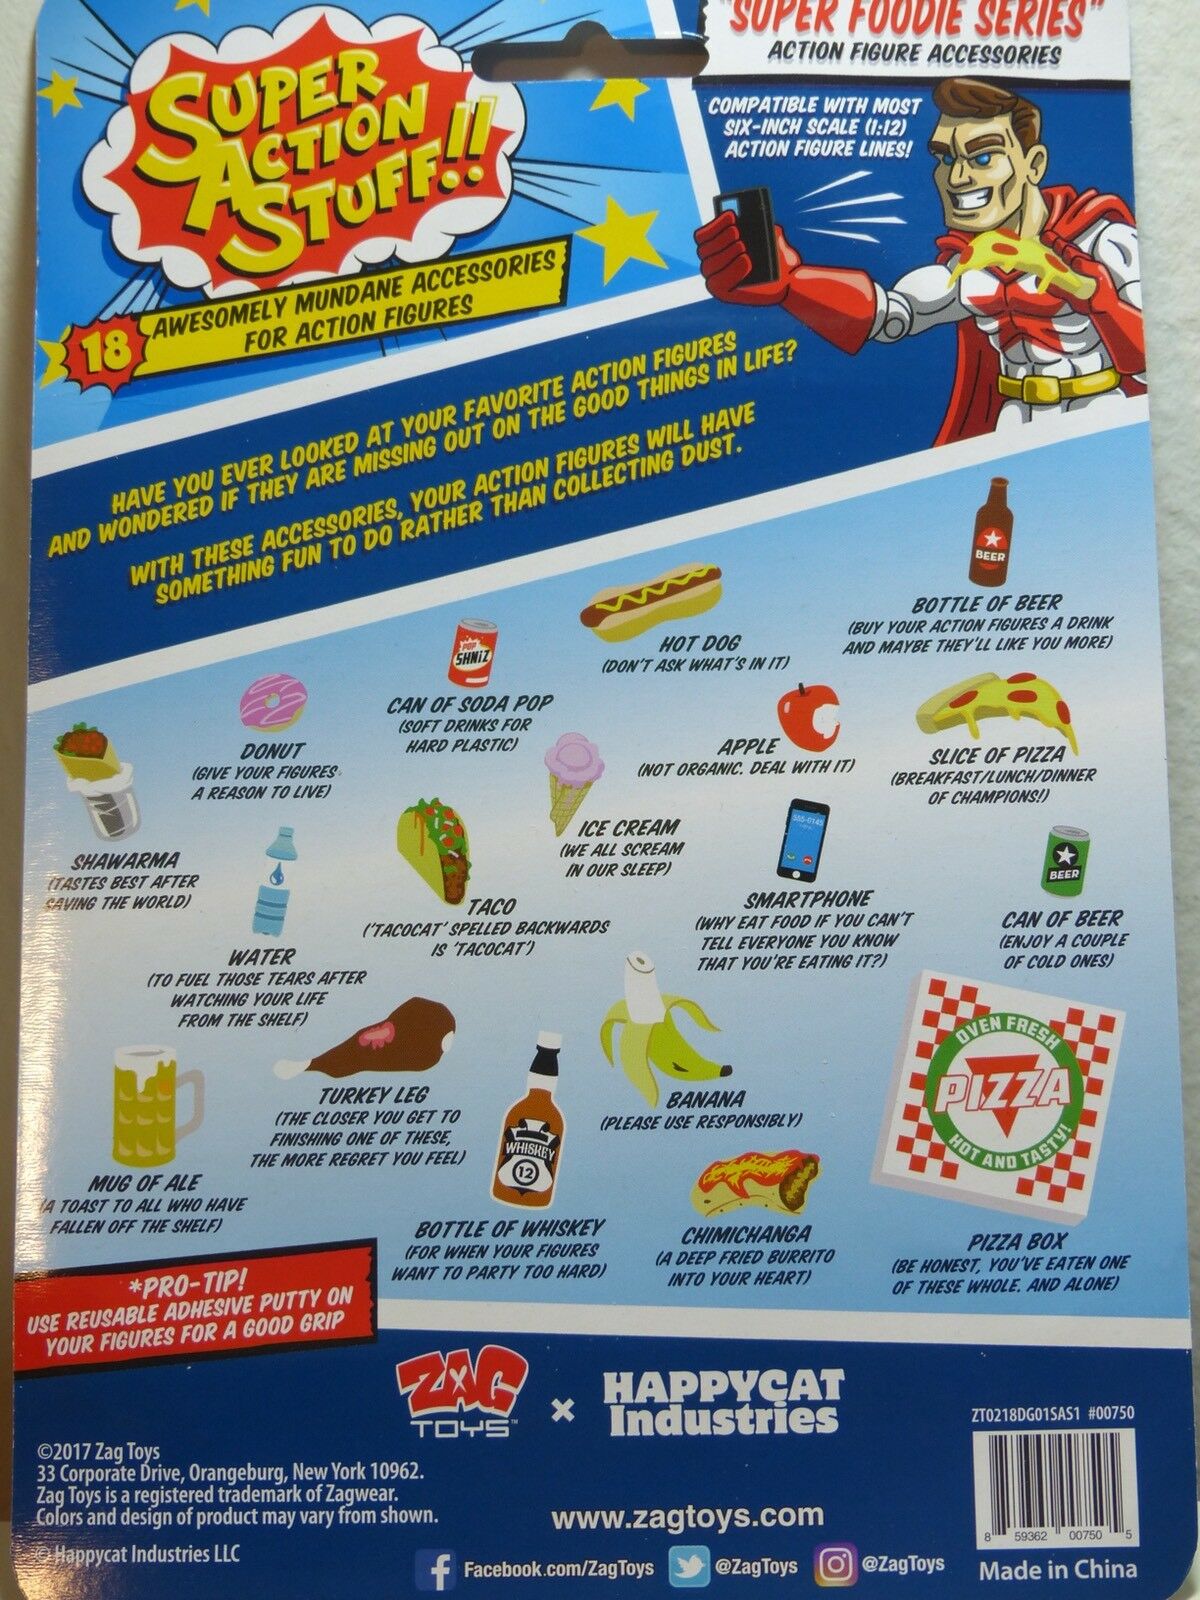 Super Action Stuff 18 Piece Super Foodie Action Figure Accessories 1:12 and Six